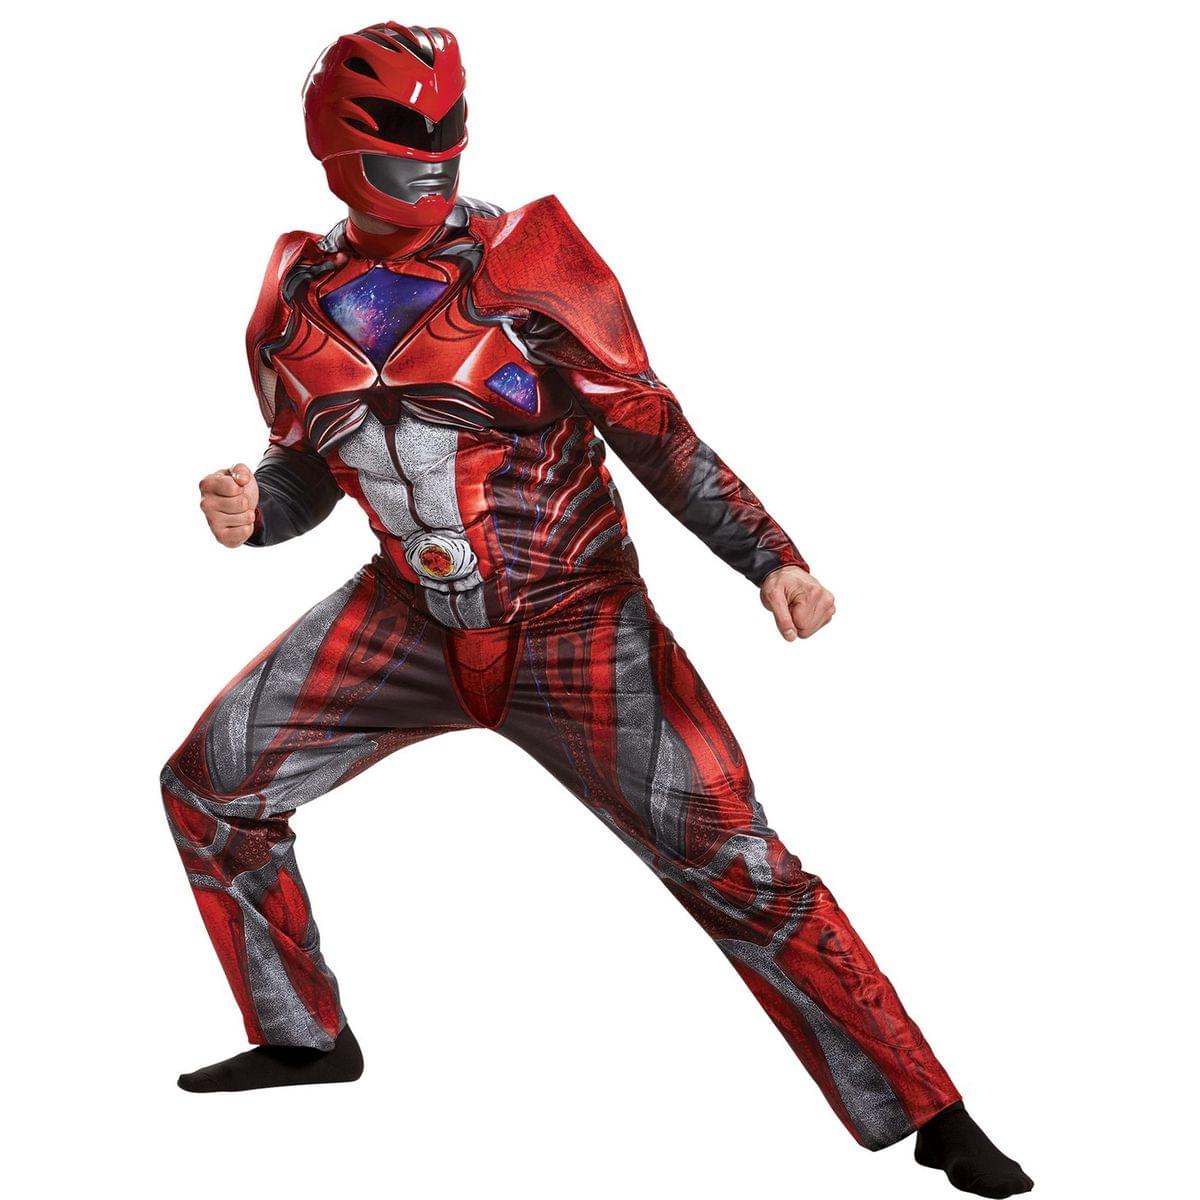 Red Ranger 2017 Muscle Chest Costume Adult Costume